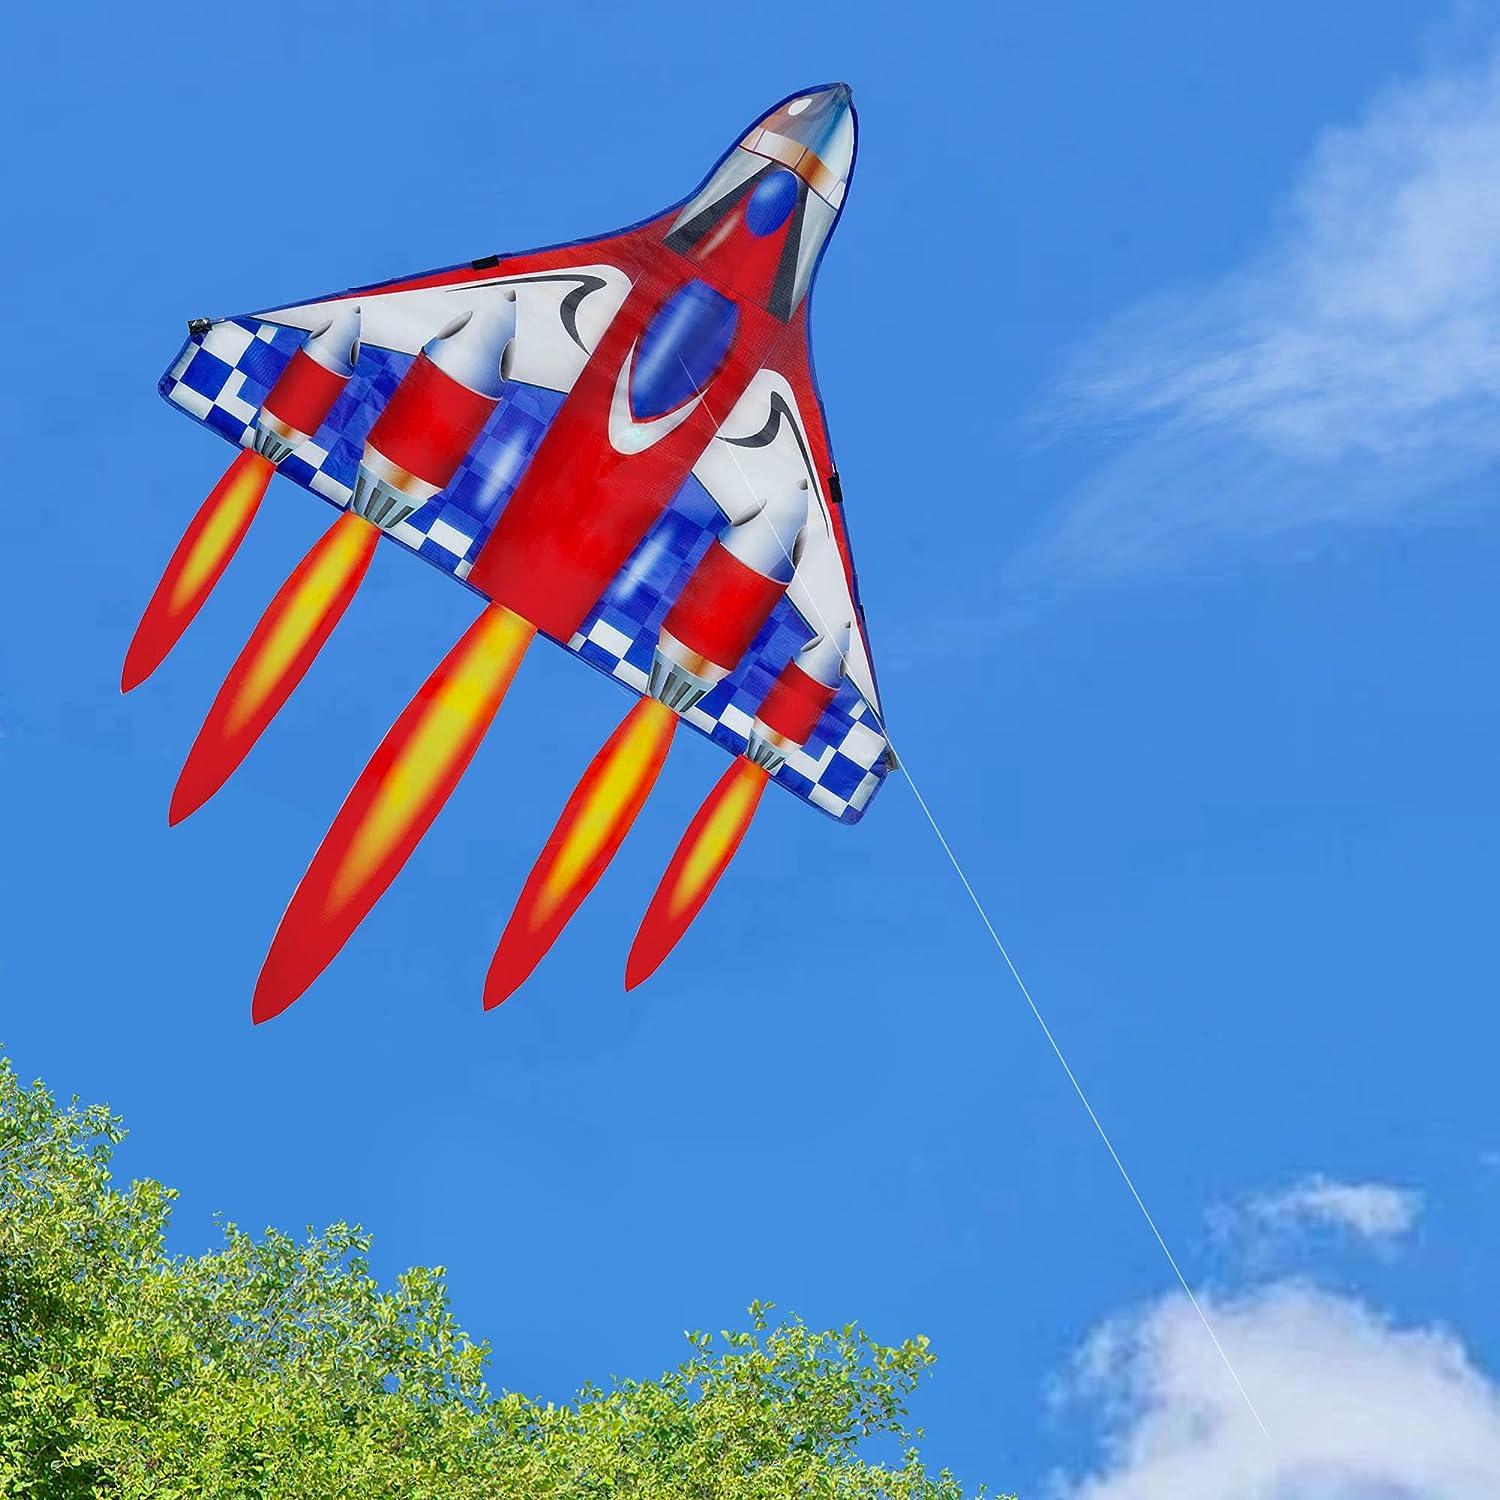 HENGDA KITE,Delta Plane Kite for Kids and Adults,Easy to Fly